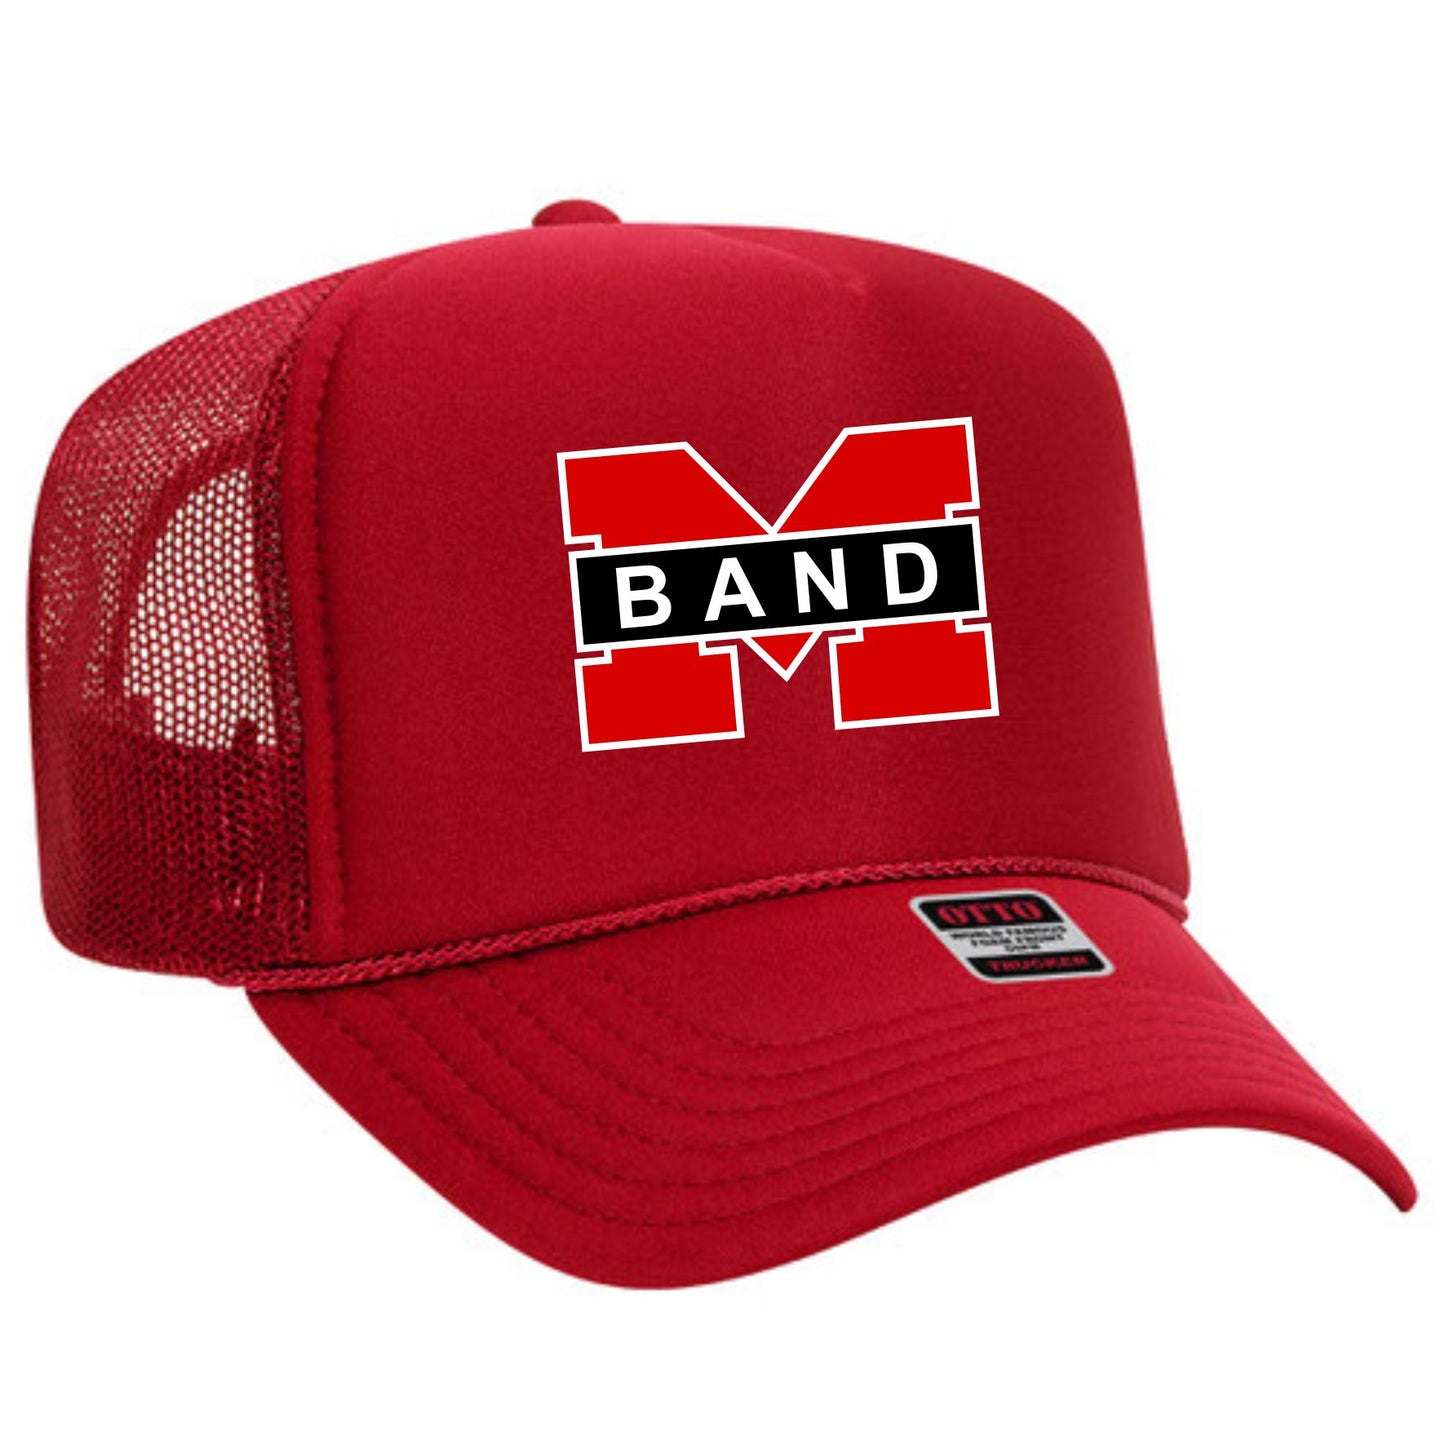 M Band Trucker Hat - Red